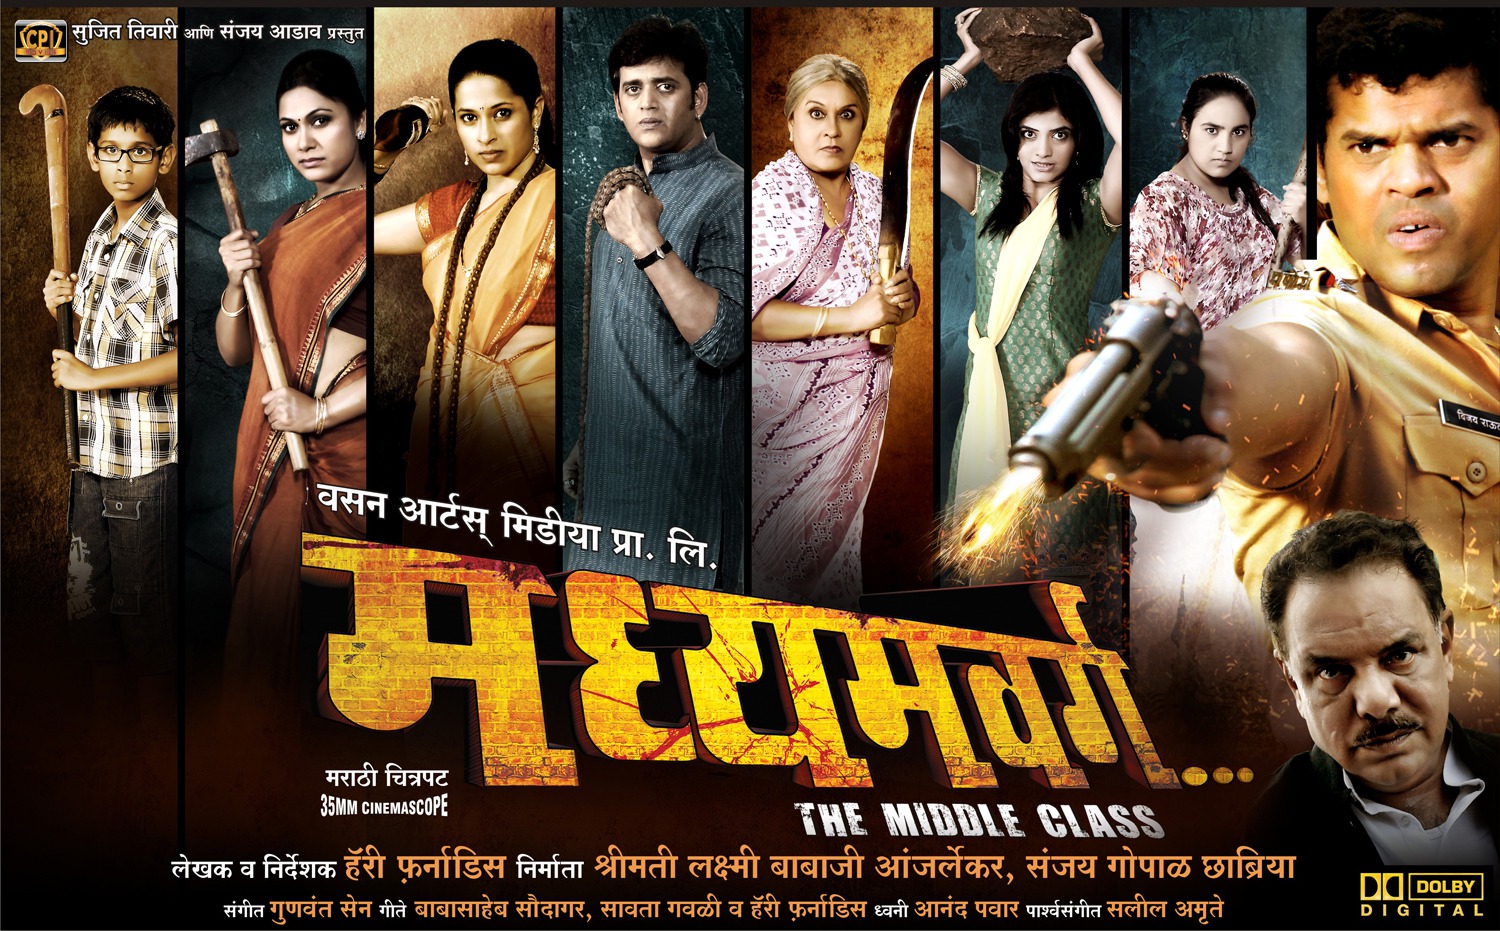 Extra Large Movie Poster Image for Madhyamvarg: The Middle Class 